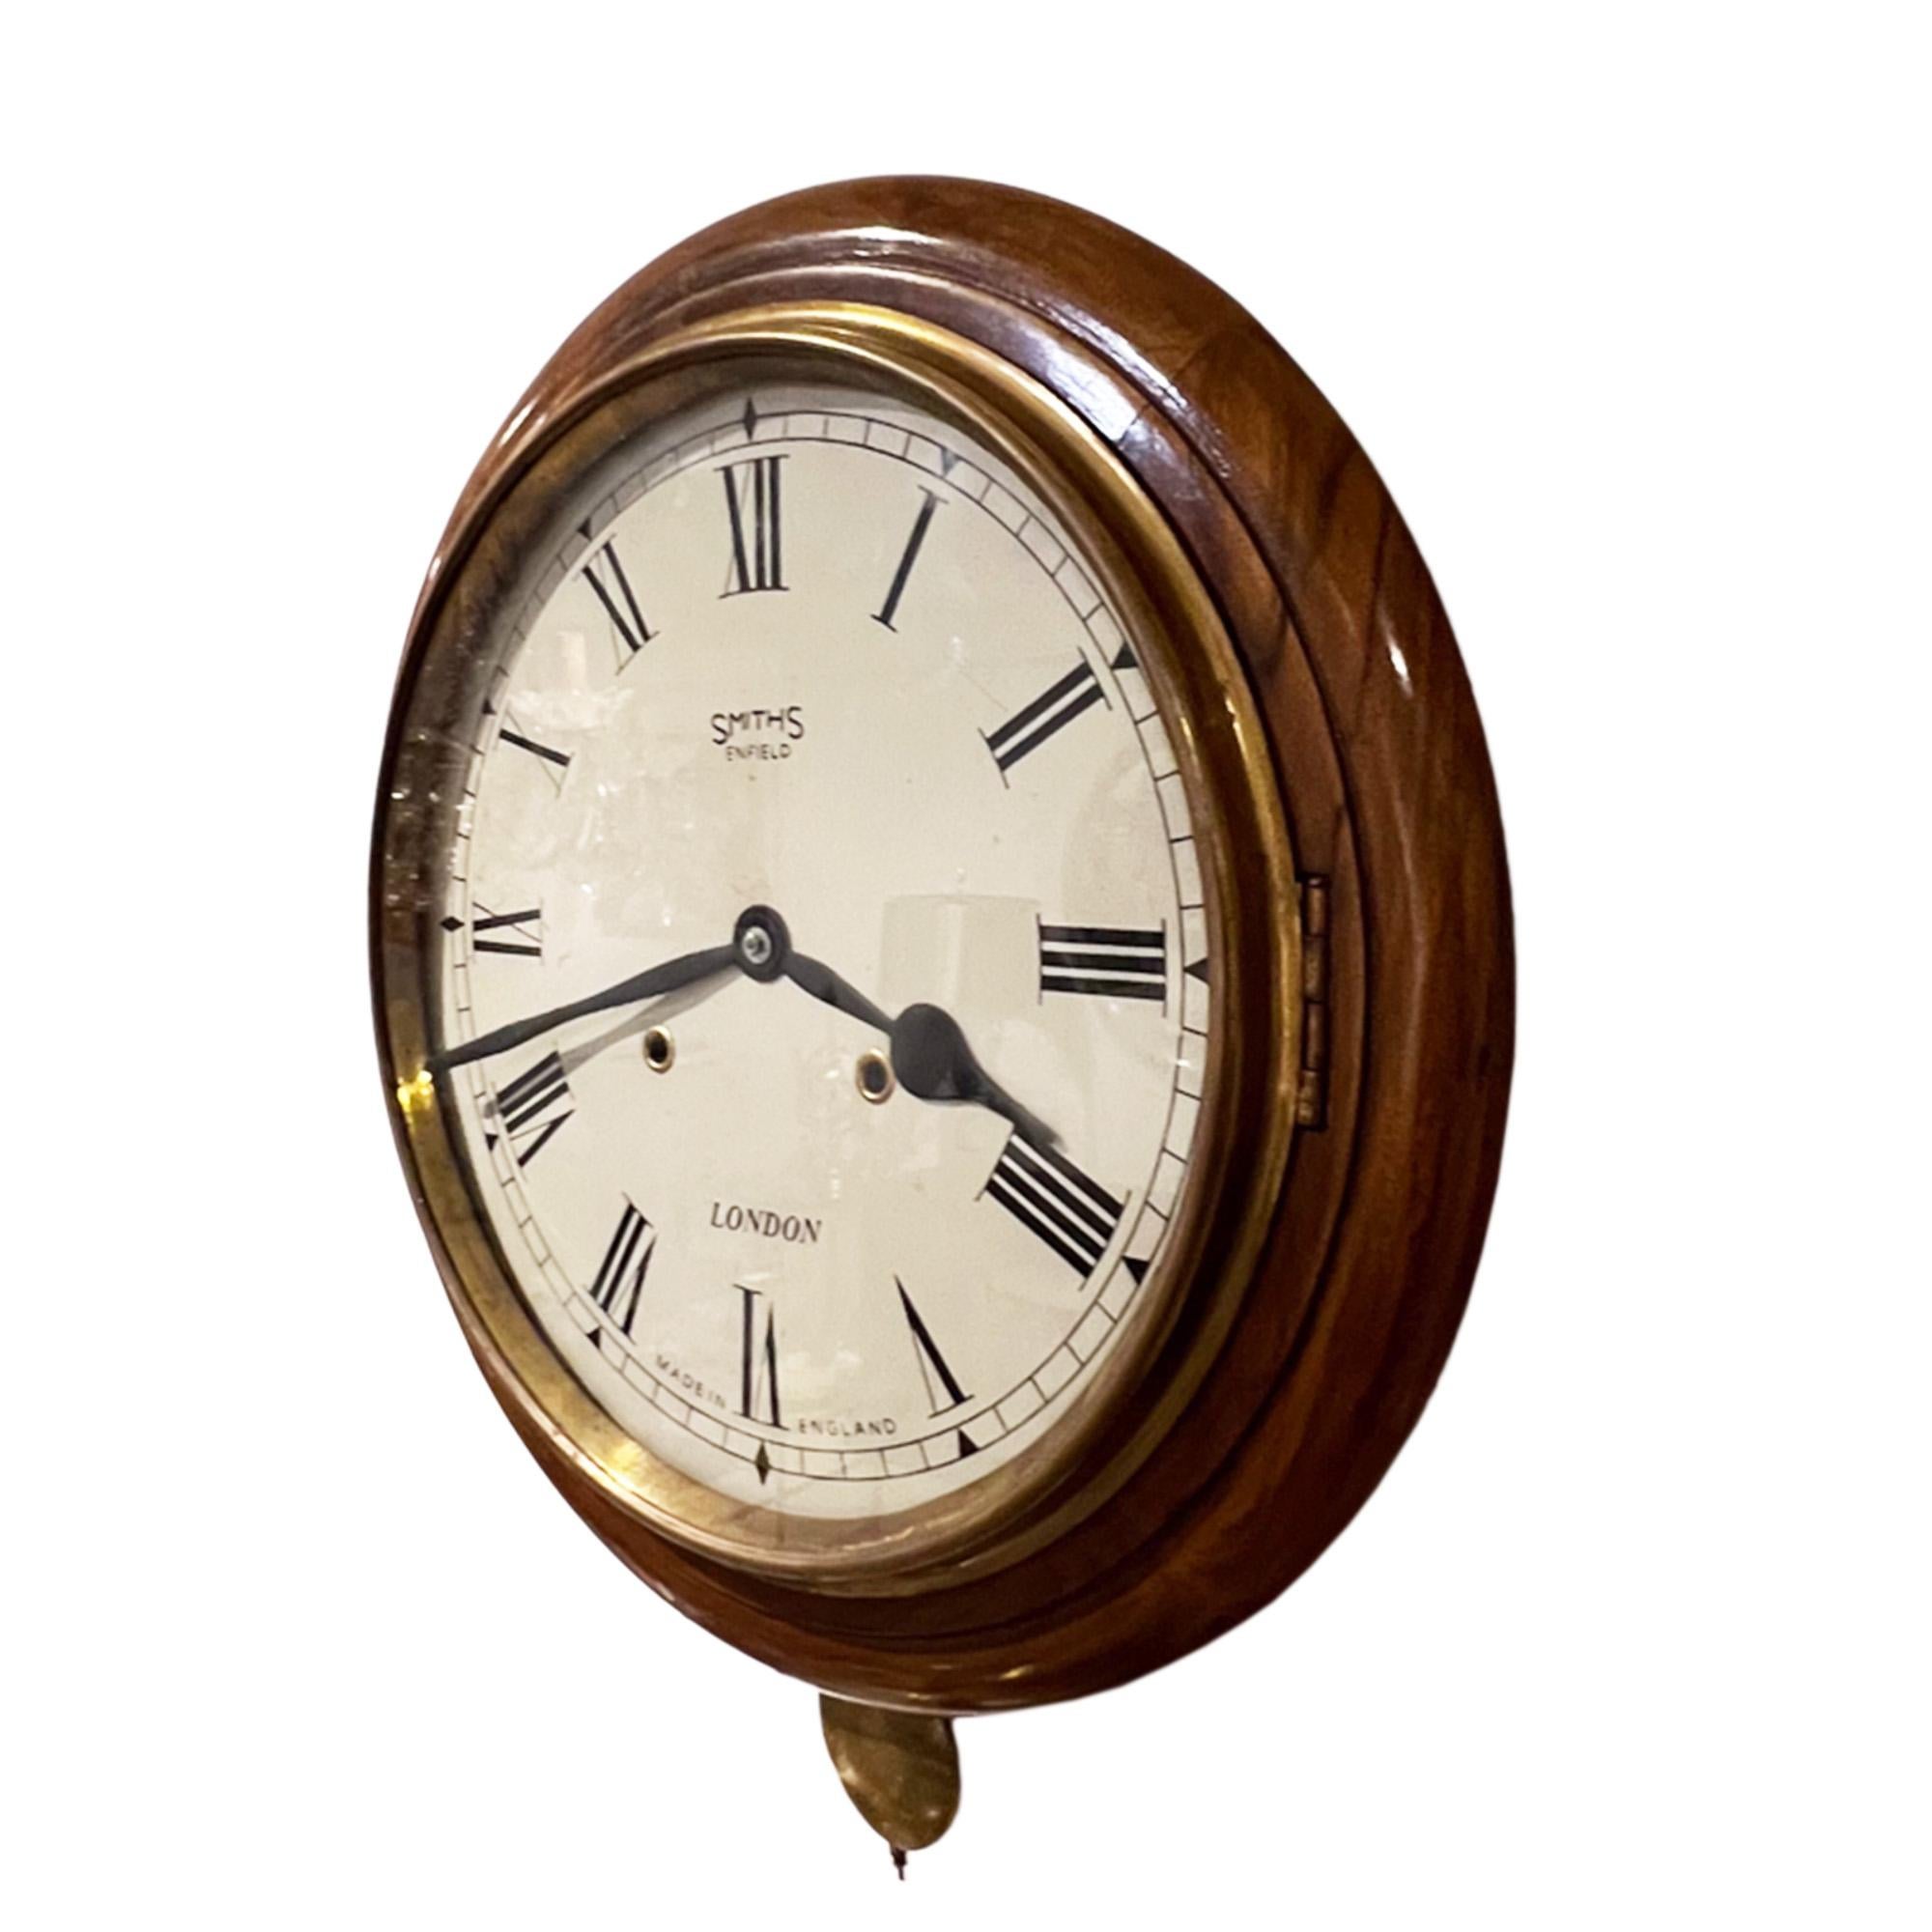 This is a charming wall clock made in Enfield, London in the early 20th century. 

It works perfectly as we have had it cleaned and fully overhauled. The clock strikes beautifully on the hour and the half hour. 

Made from walnut and we have the